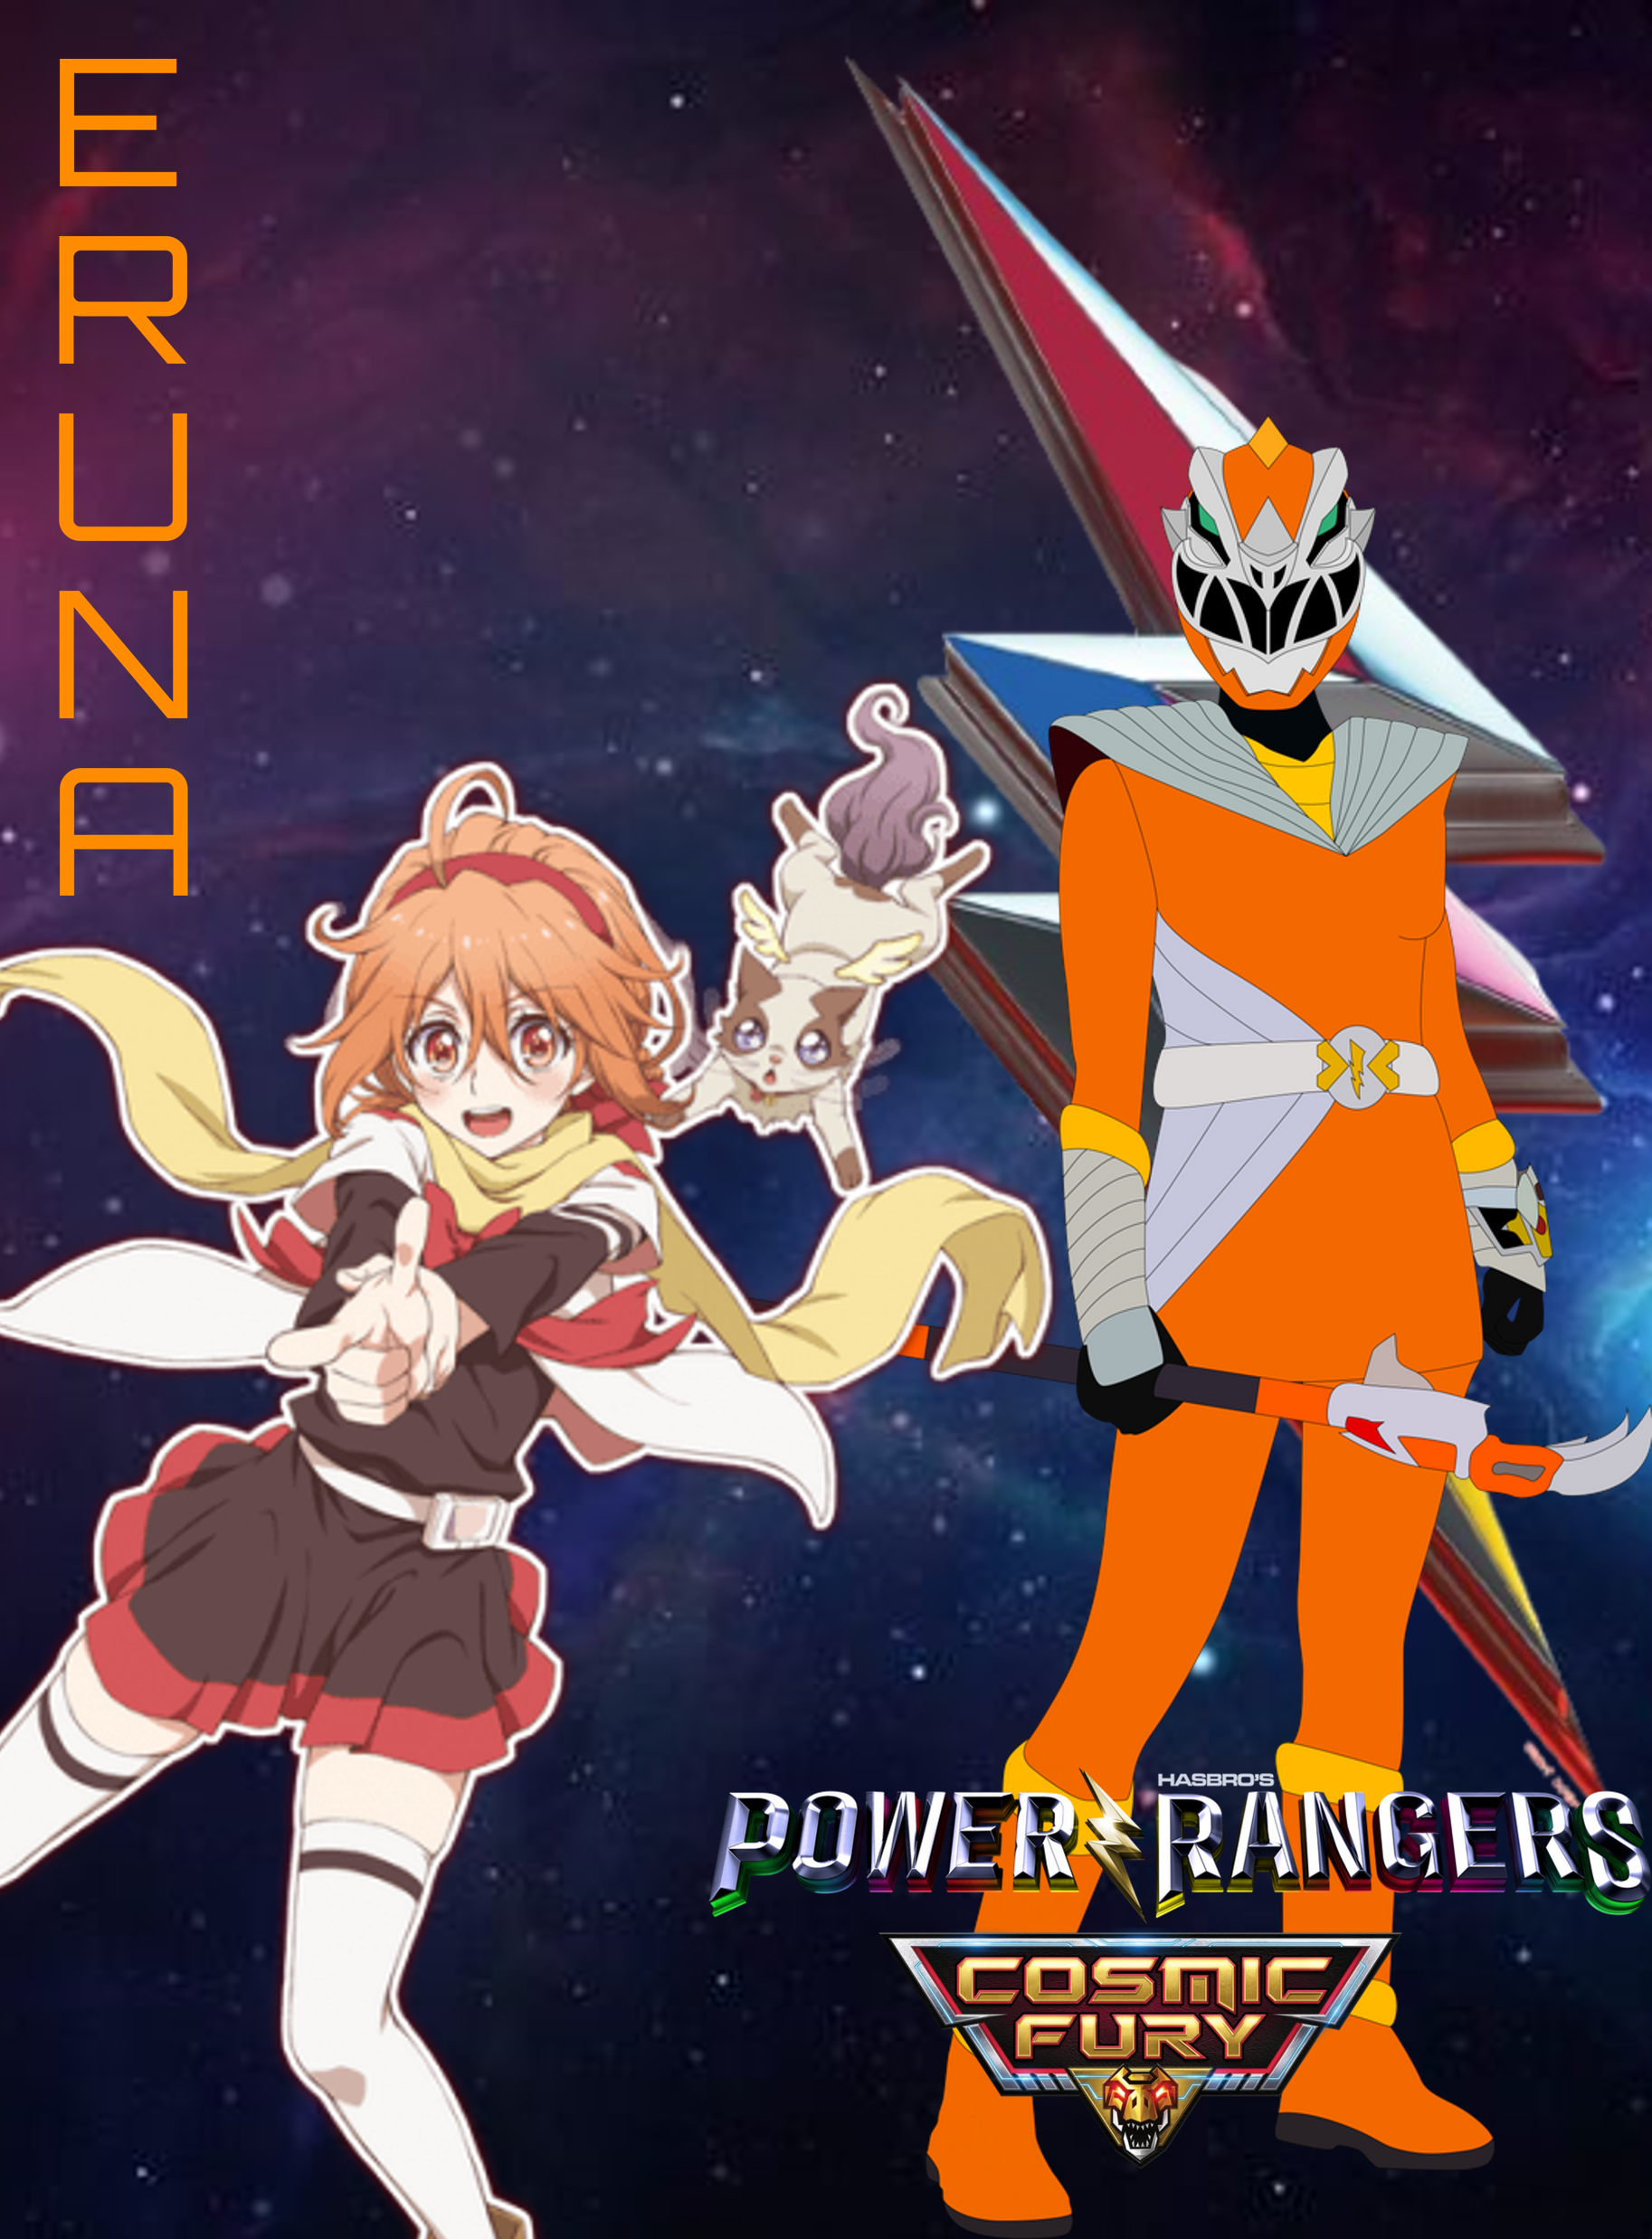 Power Rangers Reboot and the new ANIME 